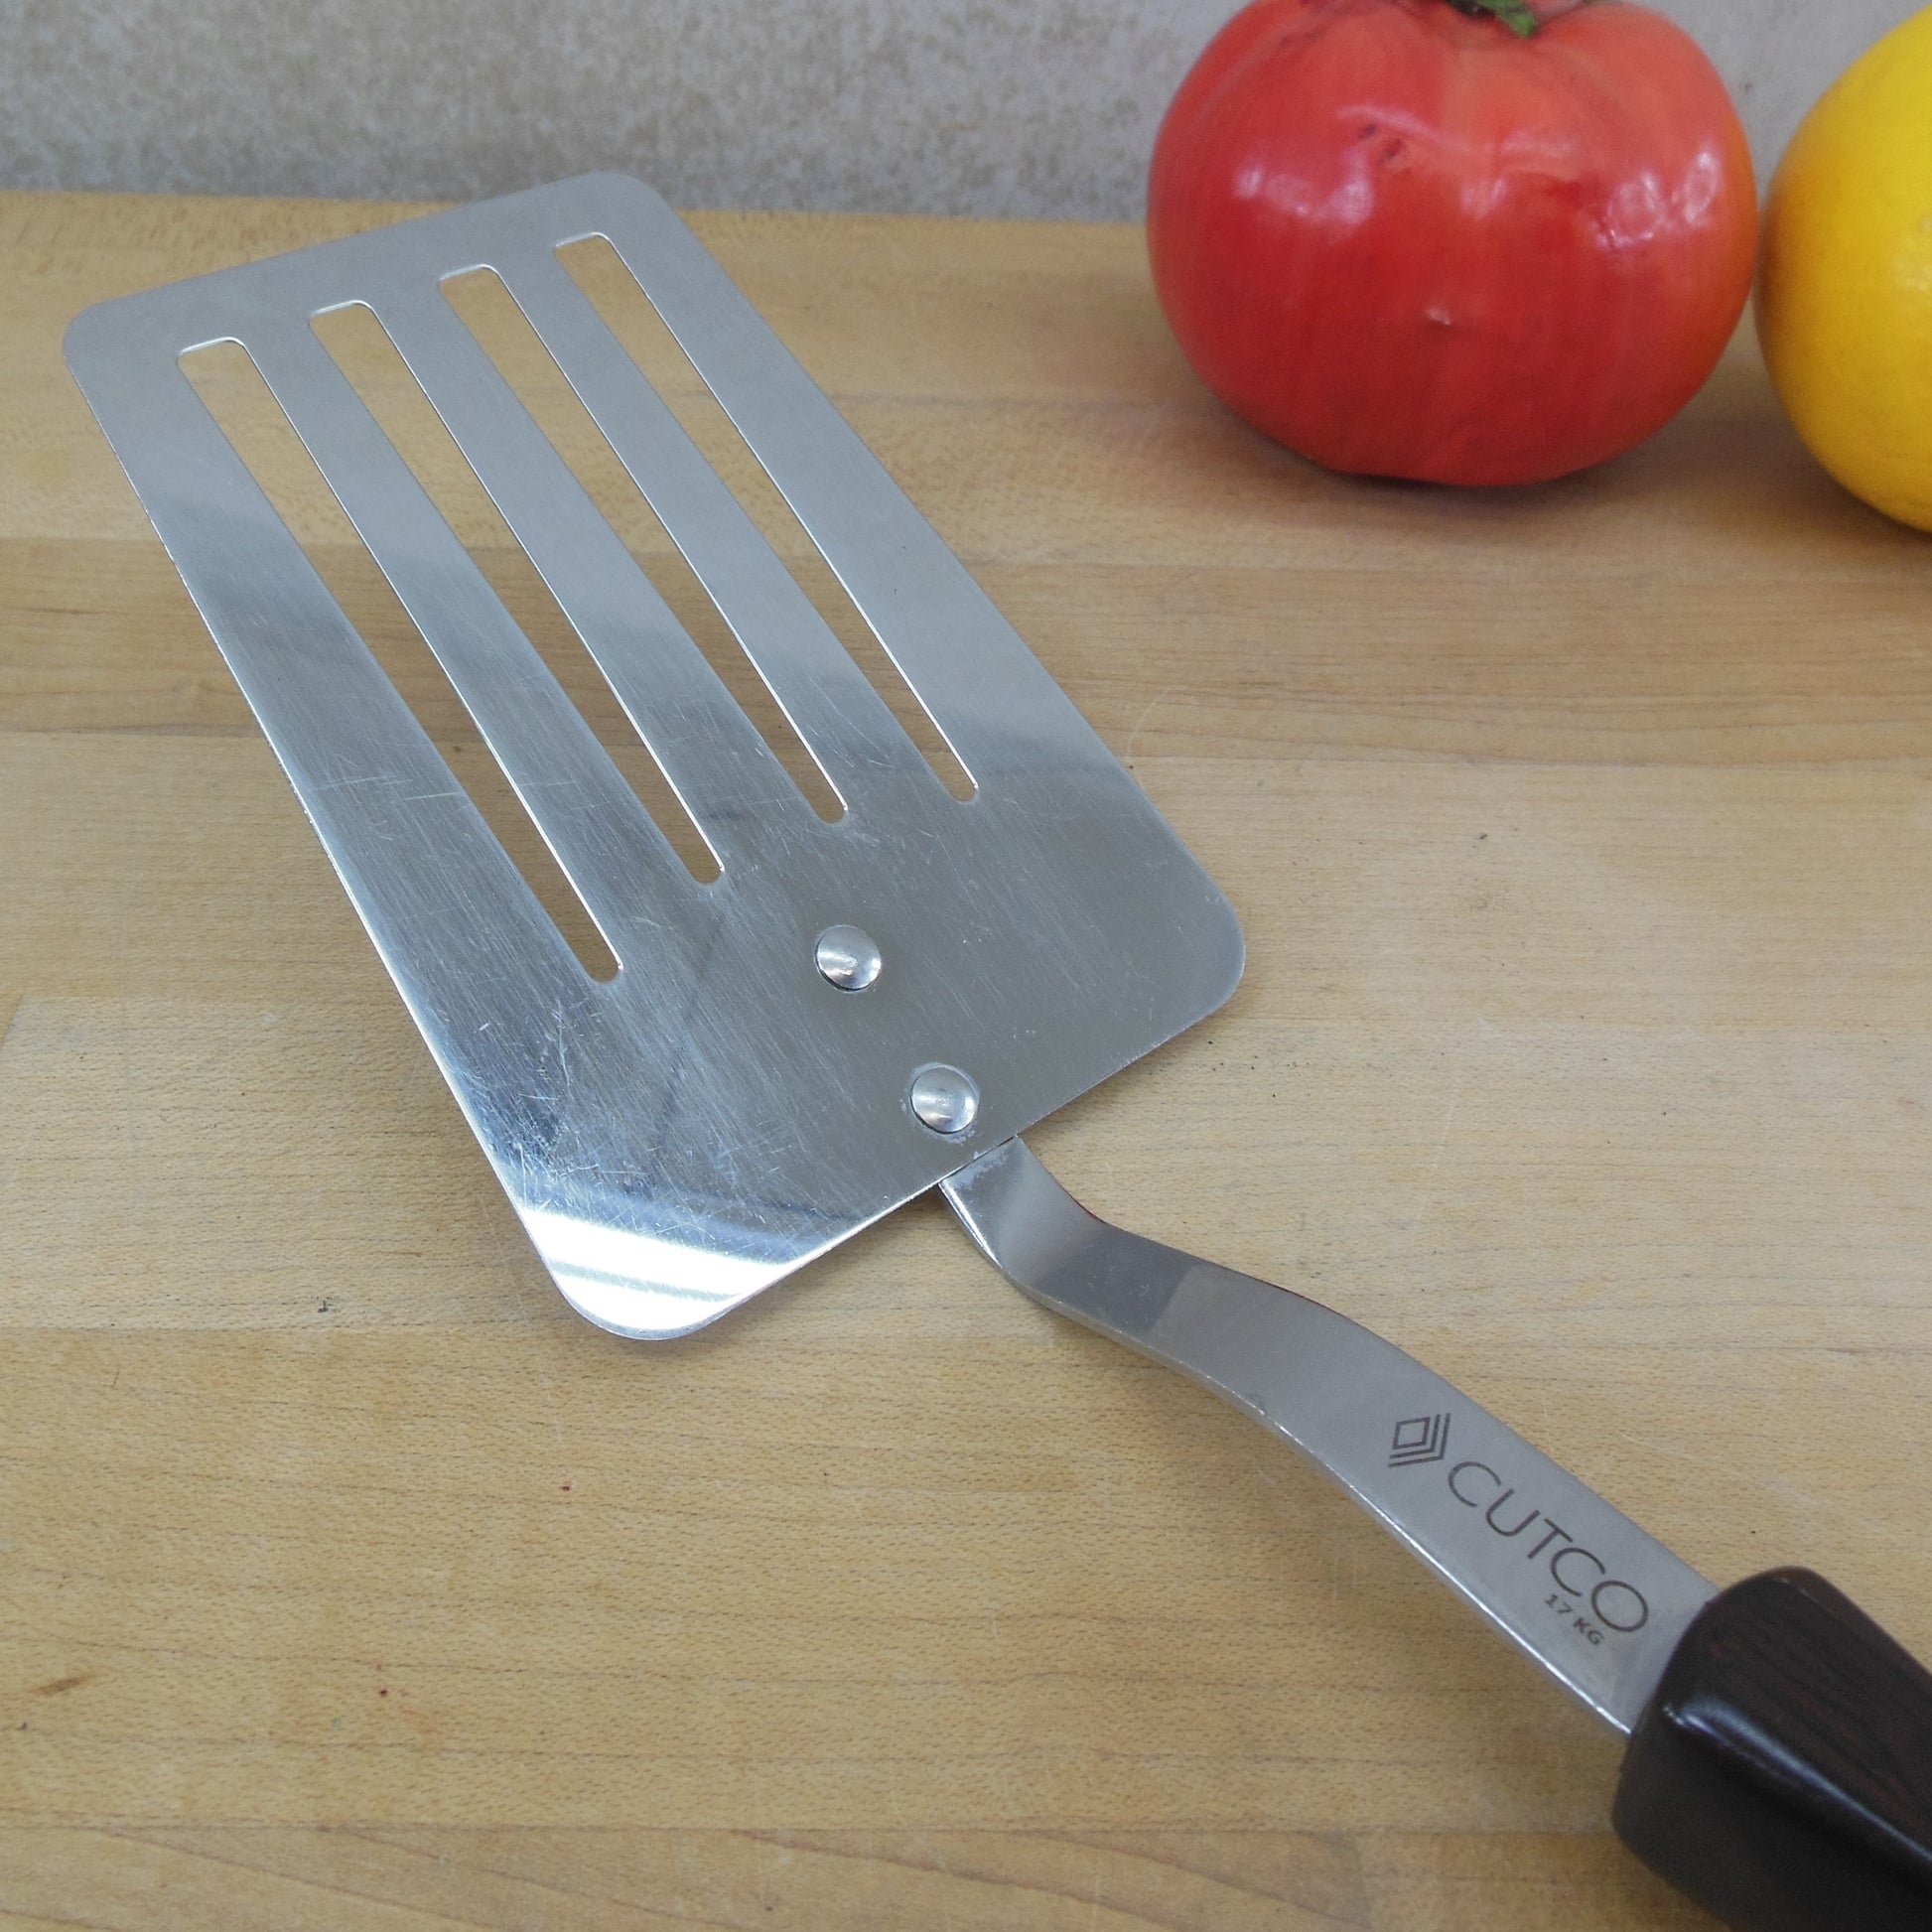 Vintage Foley Flipper Lifter Curved Spatula Stainless Steel 